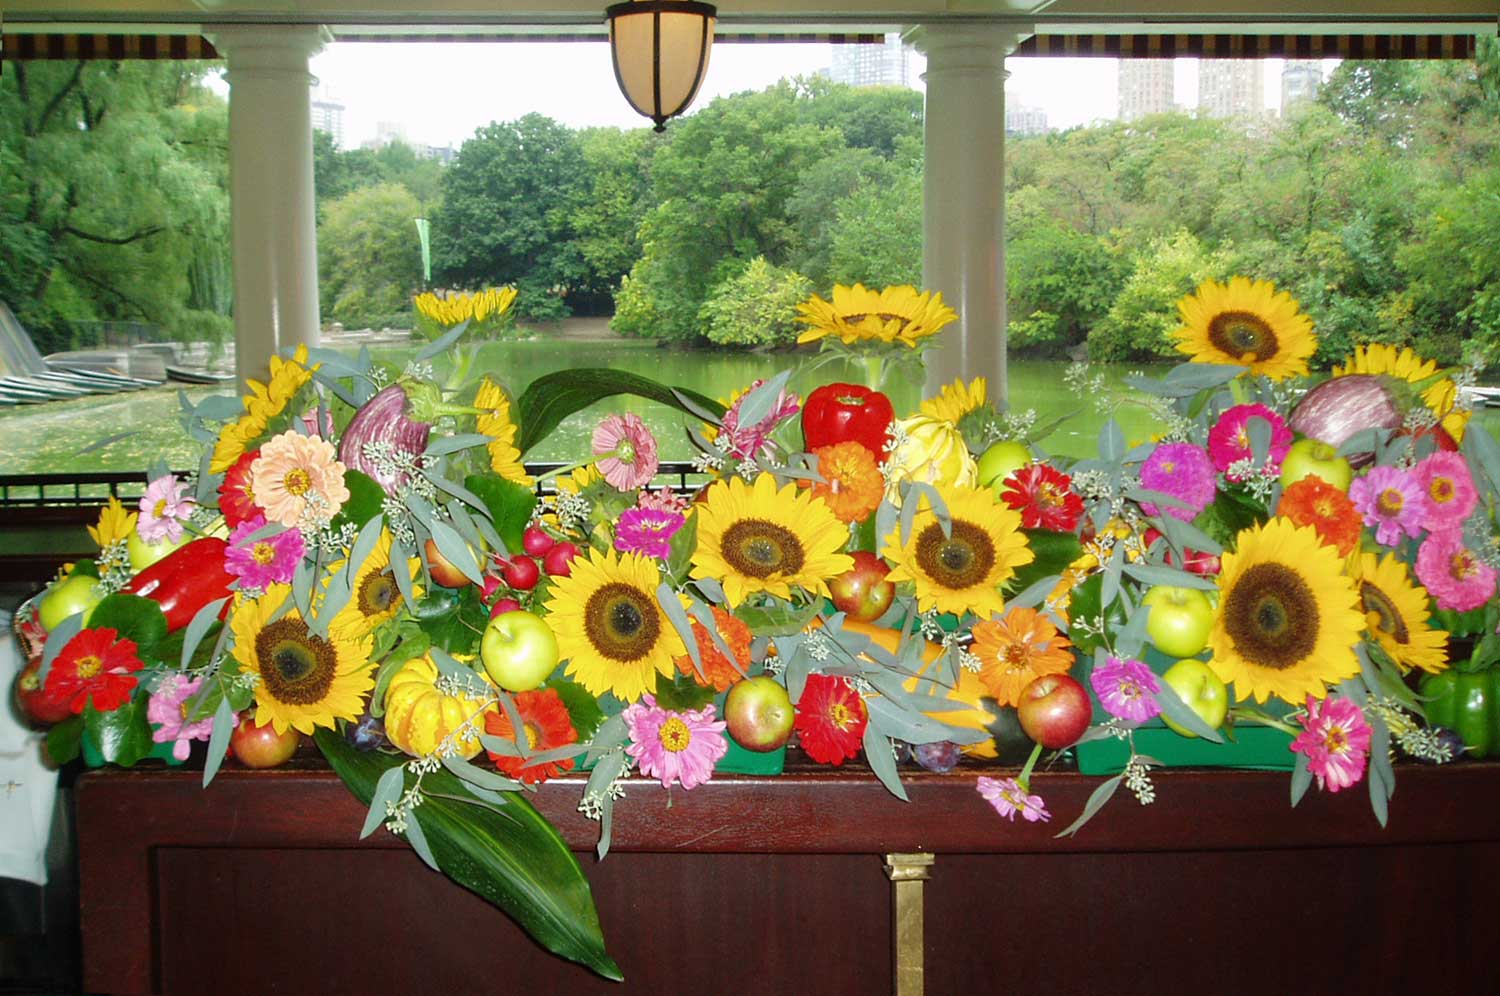  boat house, central park, new york city, ny, floral designer, florist, flower arrangement, sunflowers, dinner party, home delivery, by appointment, hamptons, manhattan 